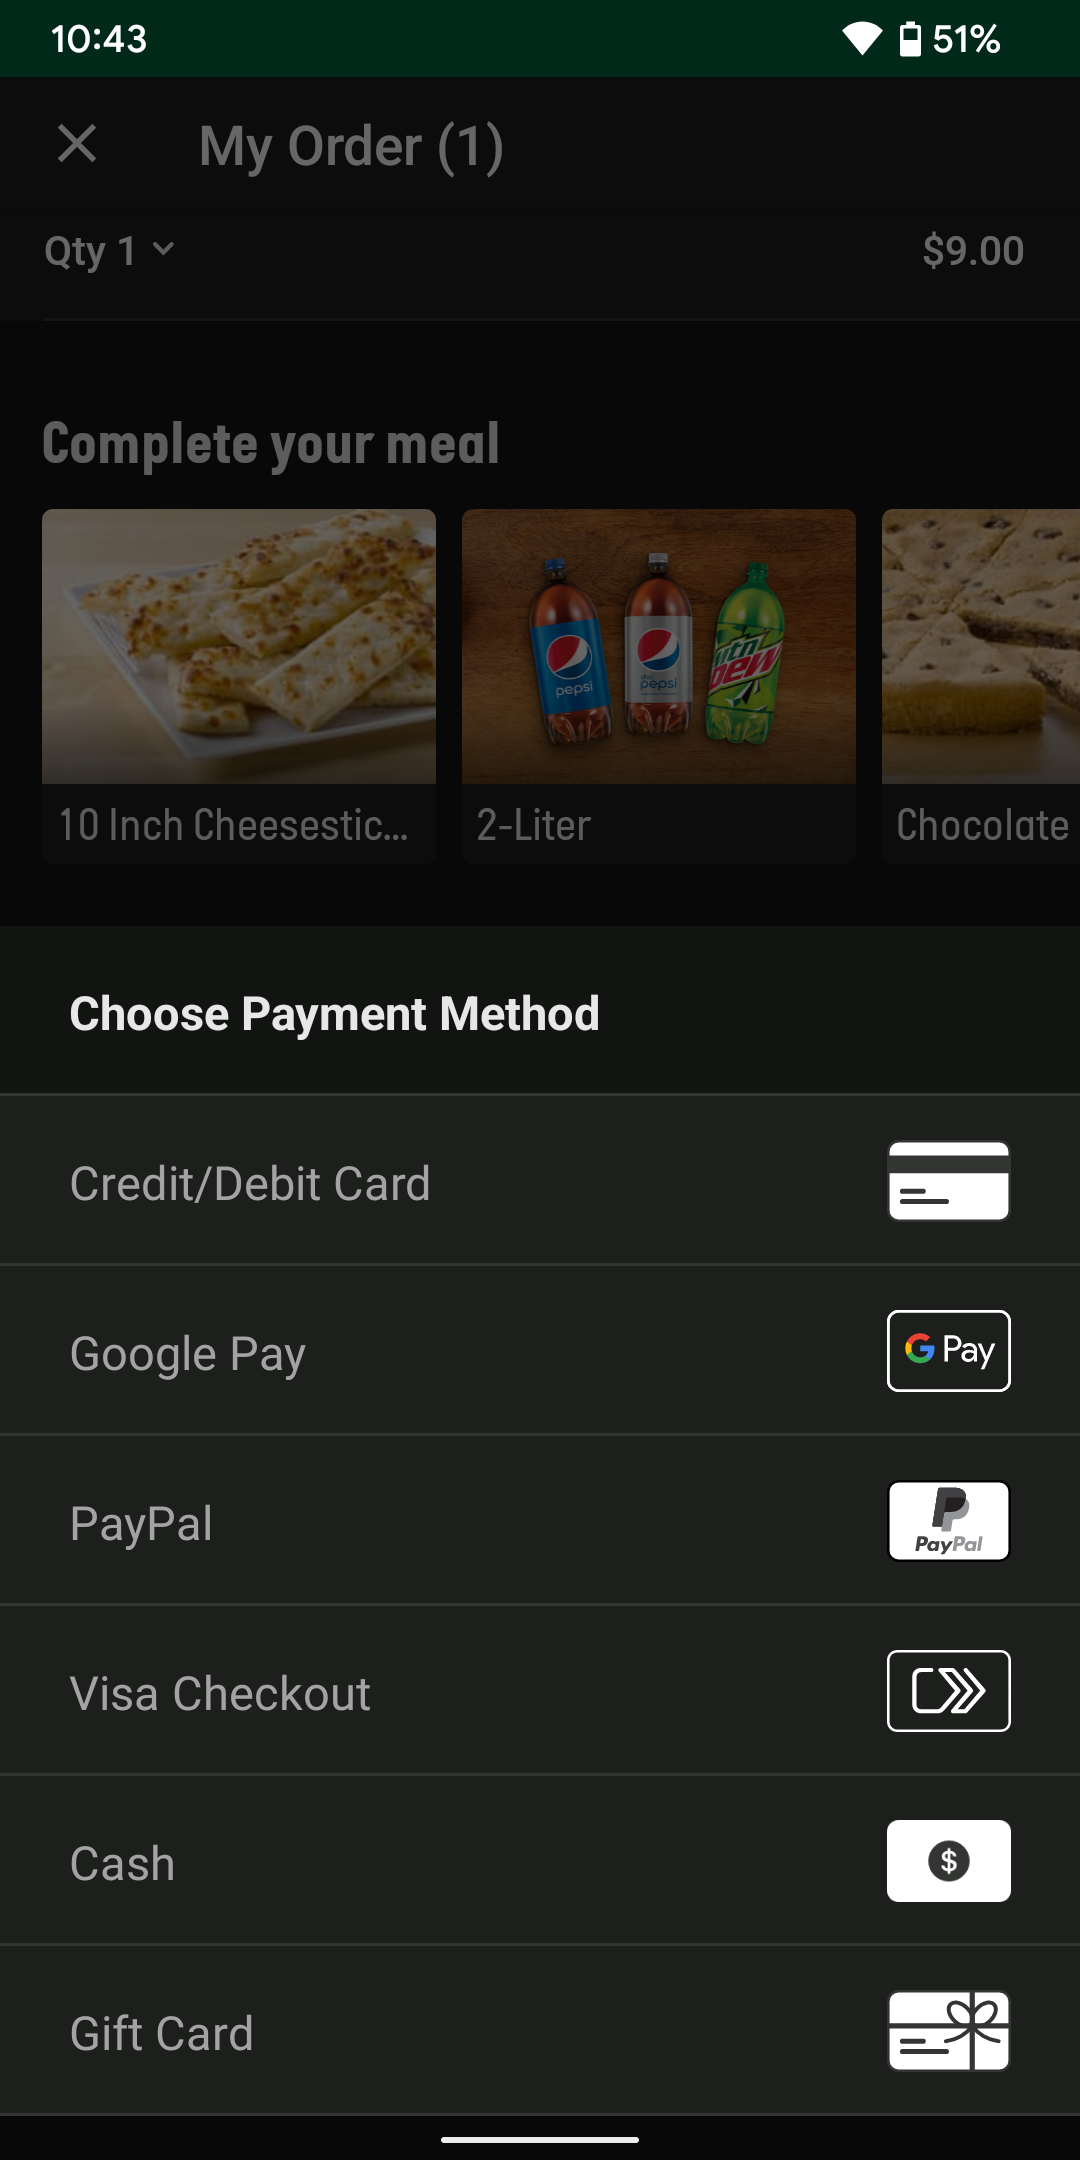 Papa John's accepts Google Pay in its Android app.